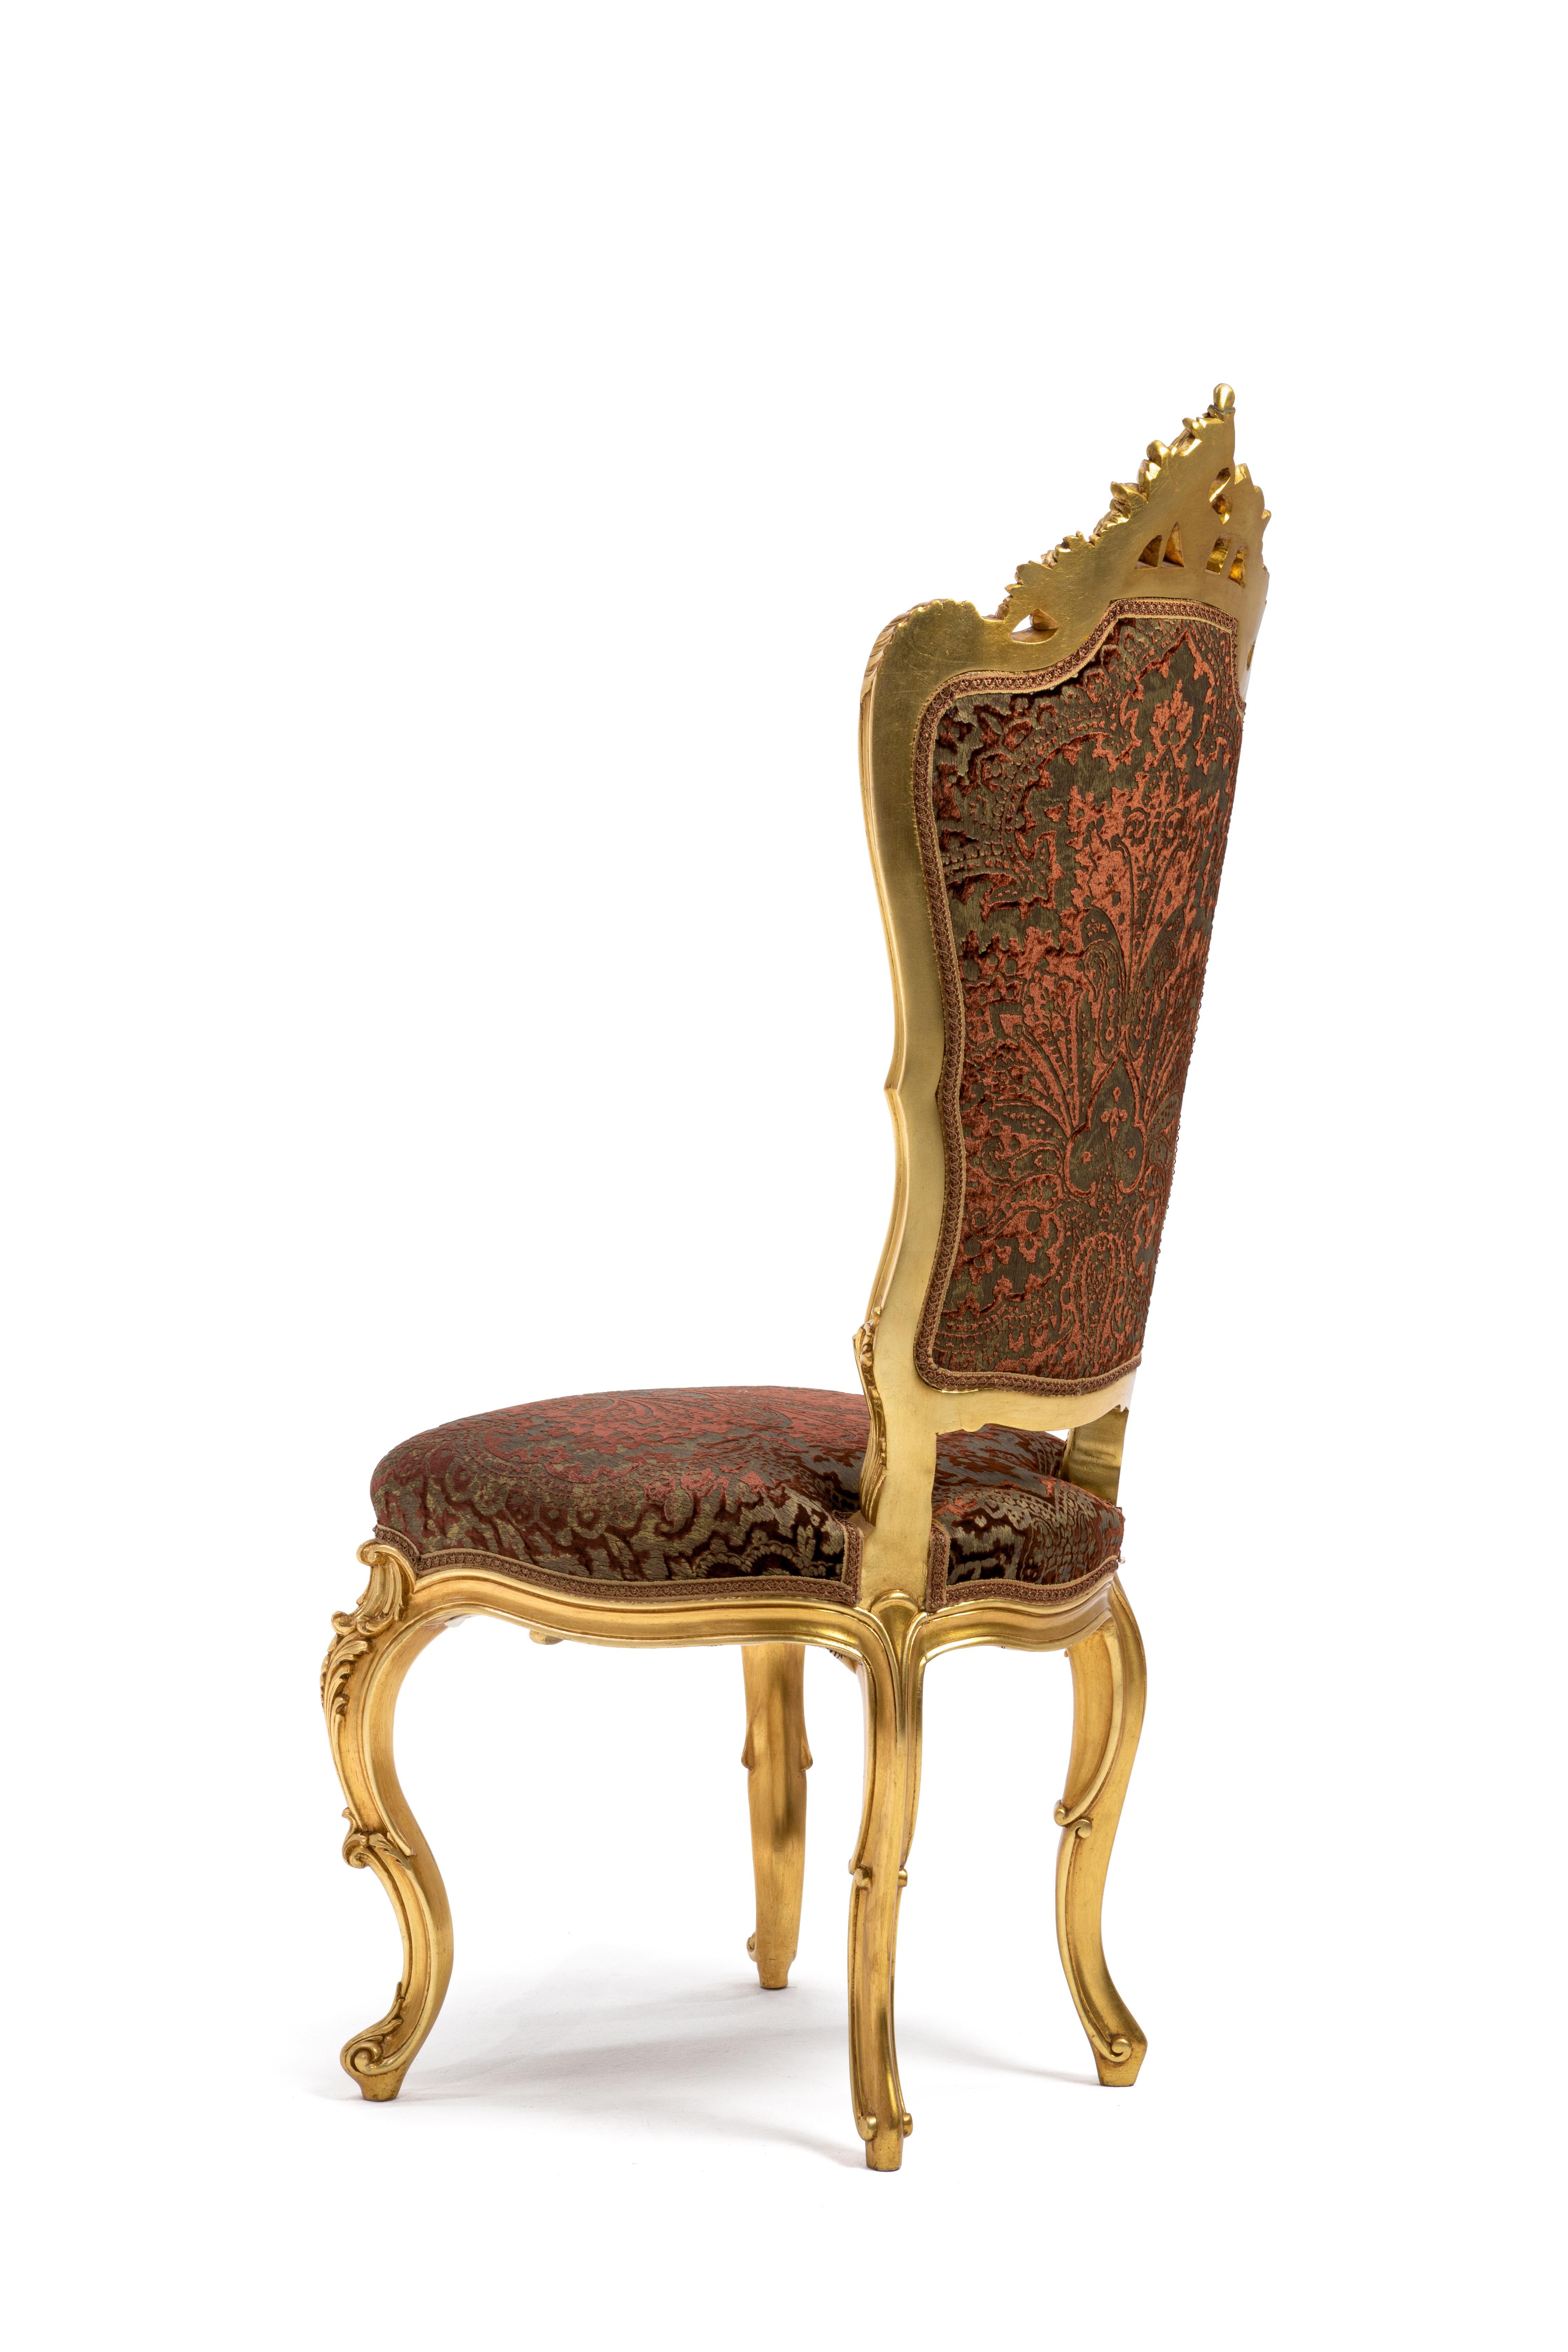 Refined baroque chair, hand carved in Italy. Wood frame gold leaf applied.
Upholstered with a precious devorè velvet in brown bronze and gold shades.
Unique piece ready to be delivered.